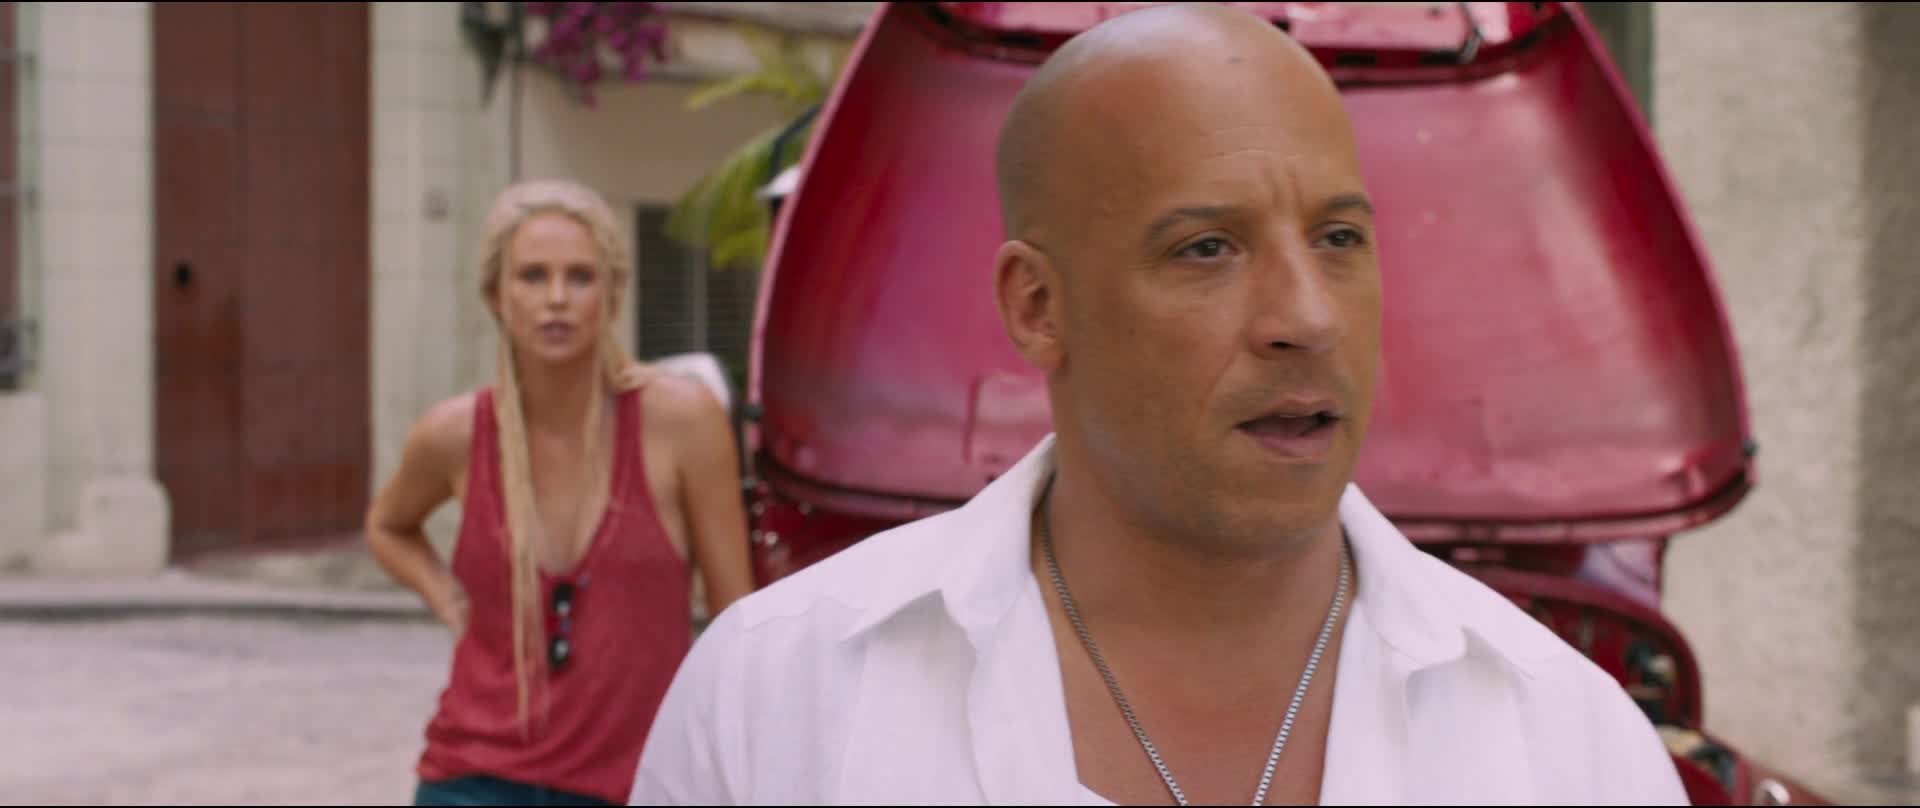 the.fate.of.the.furious.preview1.jpg